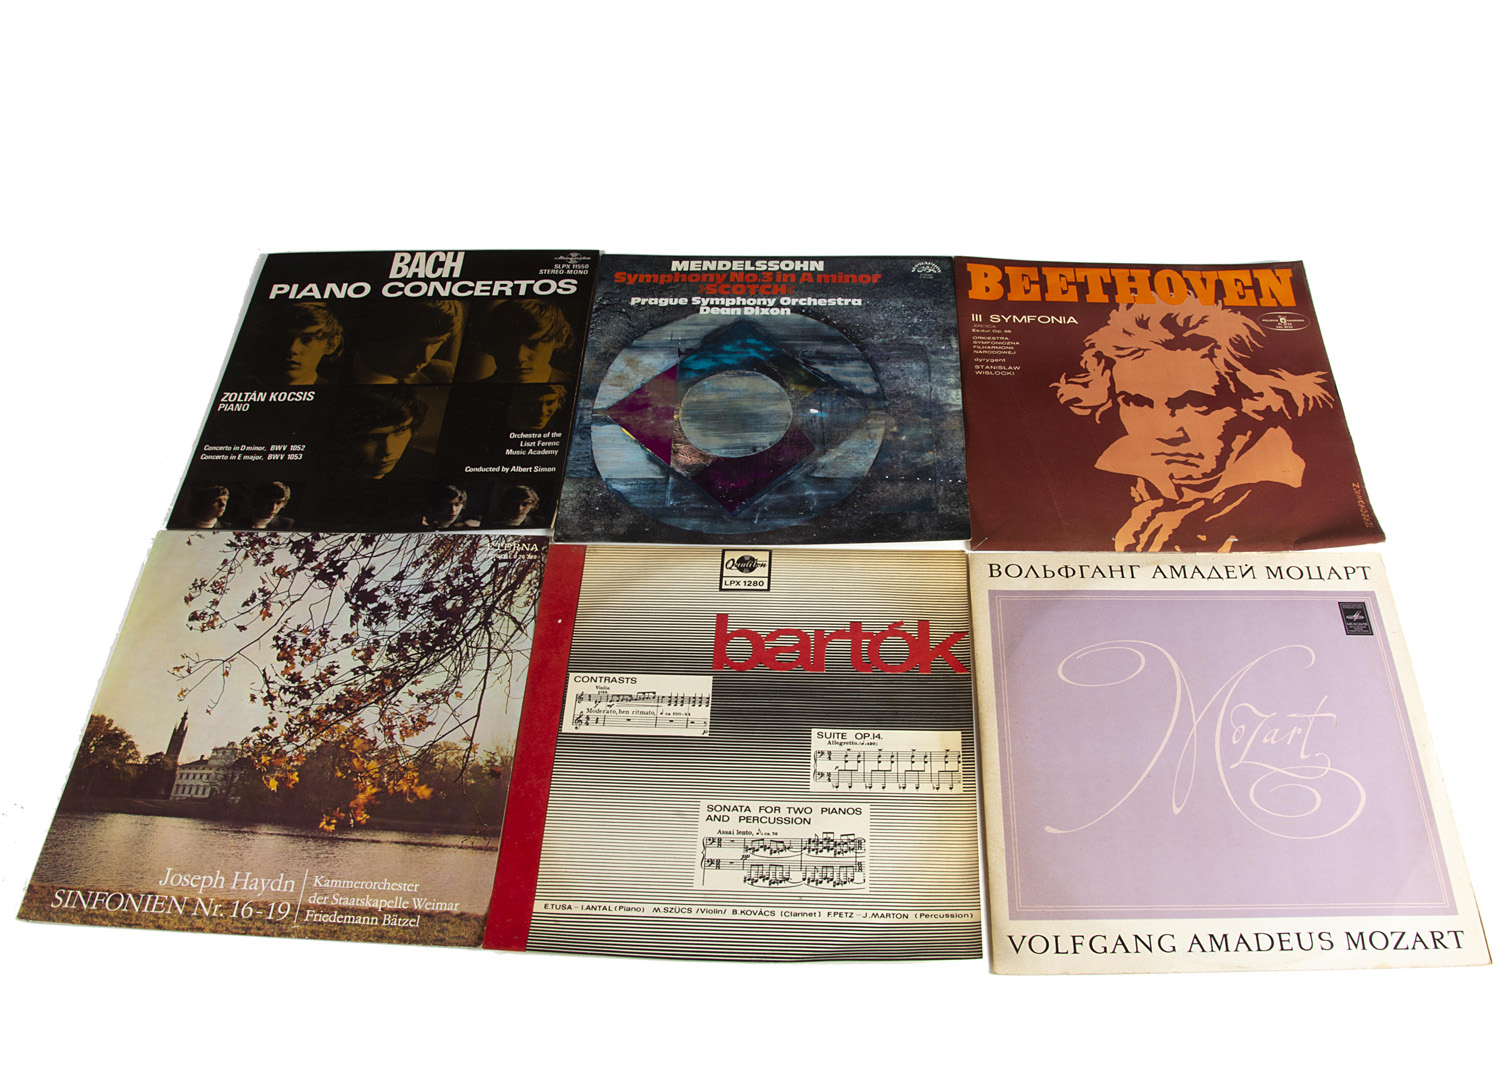 Classical LPs, approximately one hundred and fifty albums of mainly Classical music with labels of